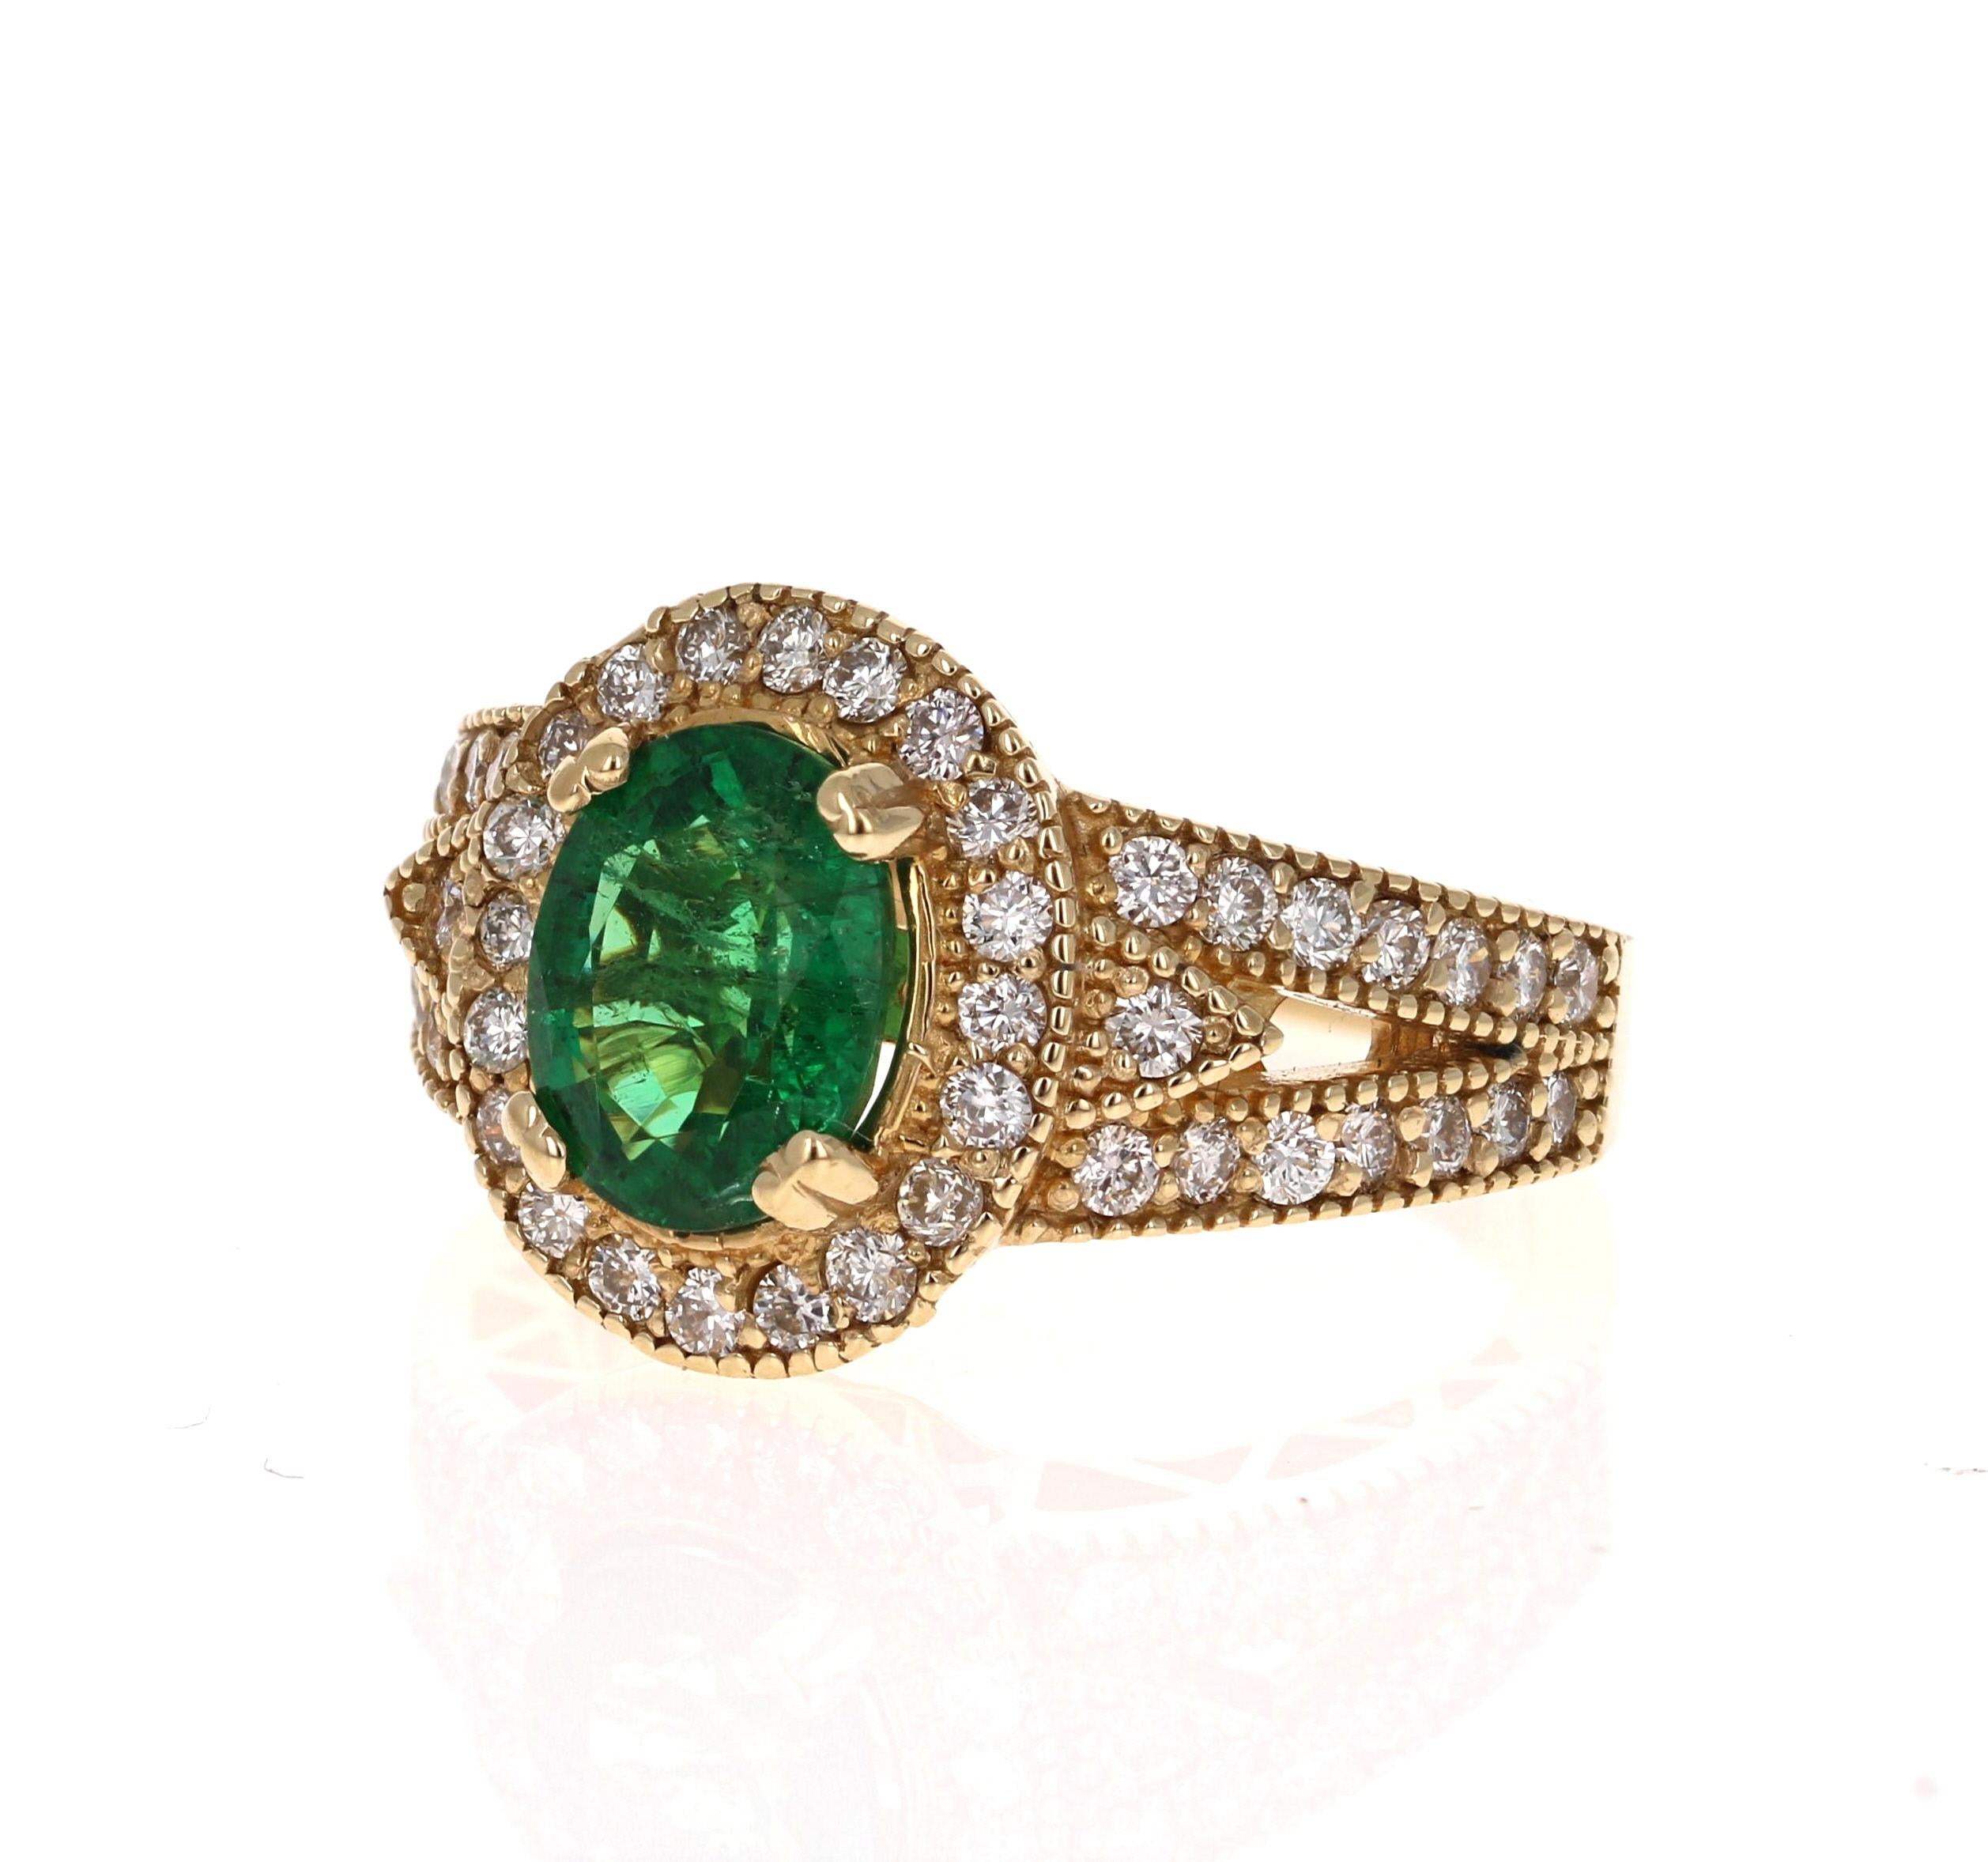 Stunning Vintage Inspired Oval Cut Emerald Diamond Ring! 

This Emerald ring is absolutely gorgeous. The center is an Oval cut Emerald which weighs 1.85 carats and is surrounded by 52 Round Cut Diamonds weighing 0.97 carats (Clarity: VS, Color: H).